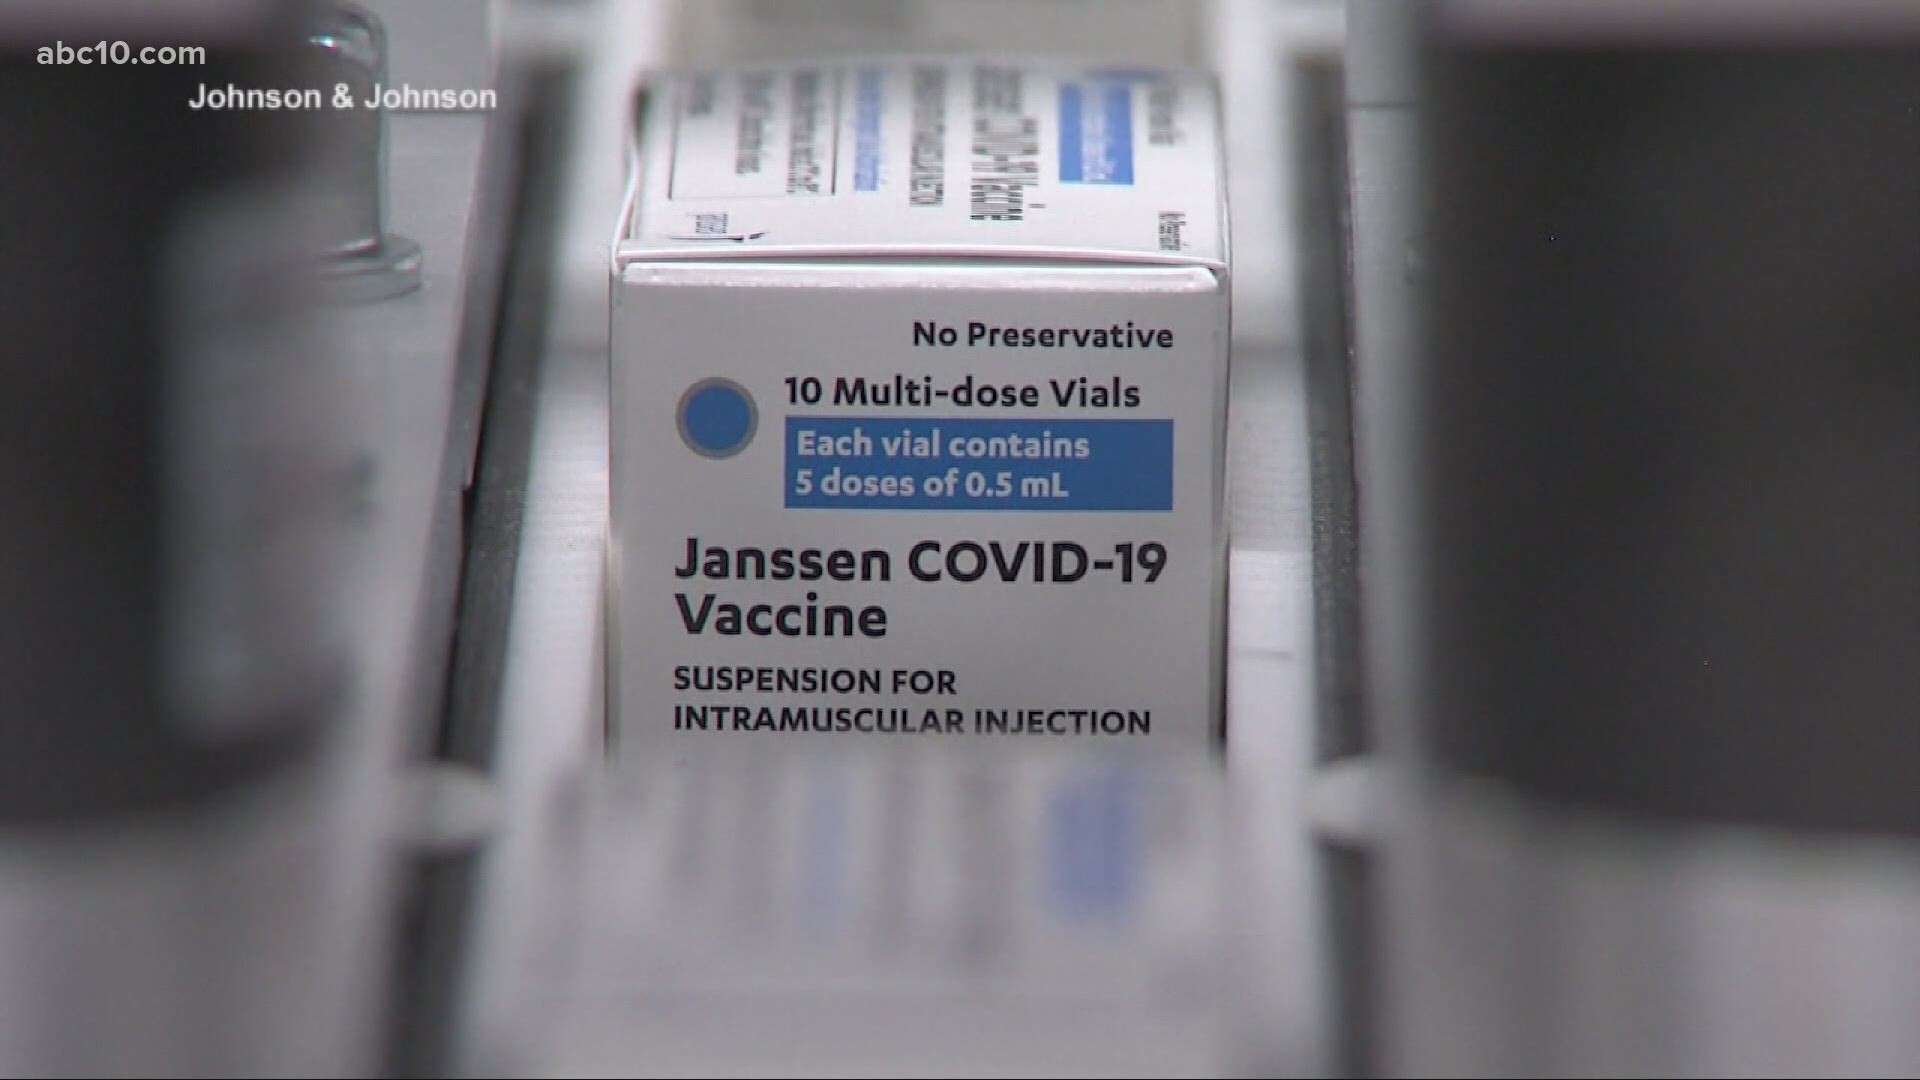 Safety of the vaccine has been a major concern for people waiting to get their shots after the J&J vaccine pause, but health officials say there are multiple options